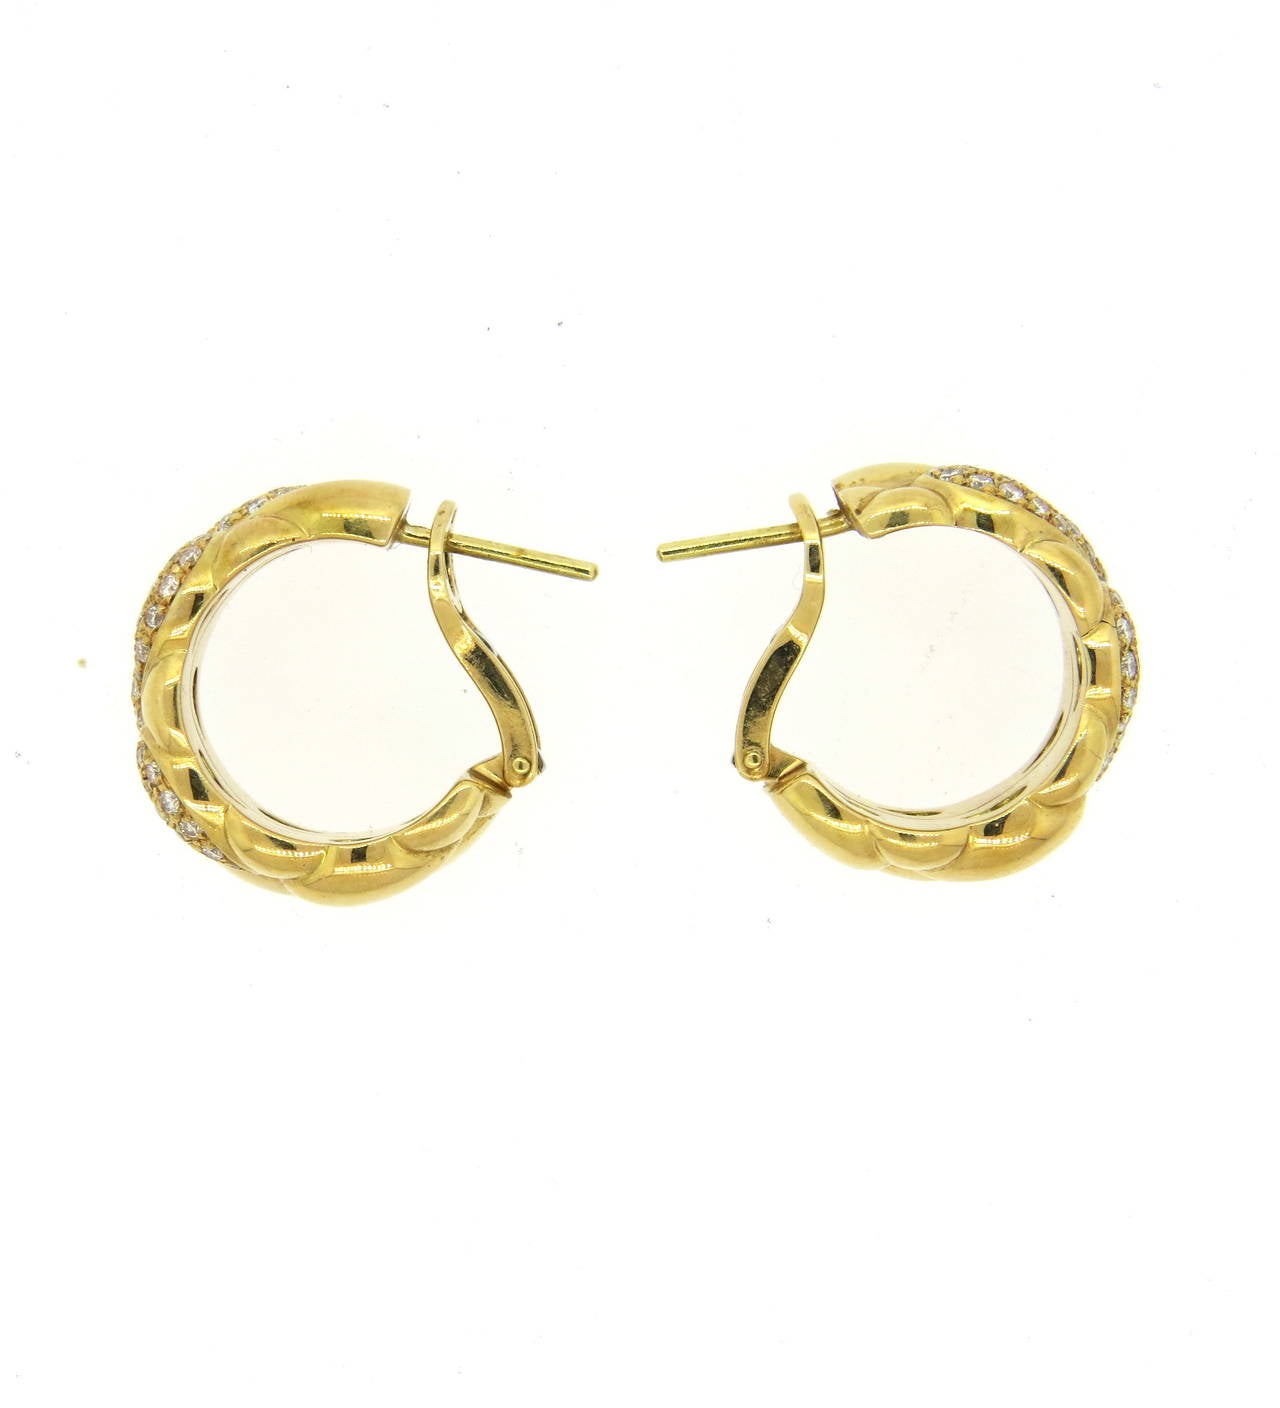 Exquisite 18K gold Chopard hoop earrings from the Casmir collection. Earrings feature approximately 1.25ctw of brilliant diamonds. Hoops measure 22mm in diameter, 11.4mm wide. Marked Chopard, Casmir, 750. Earrings weigh 23.1 grams.